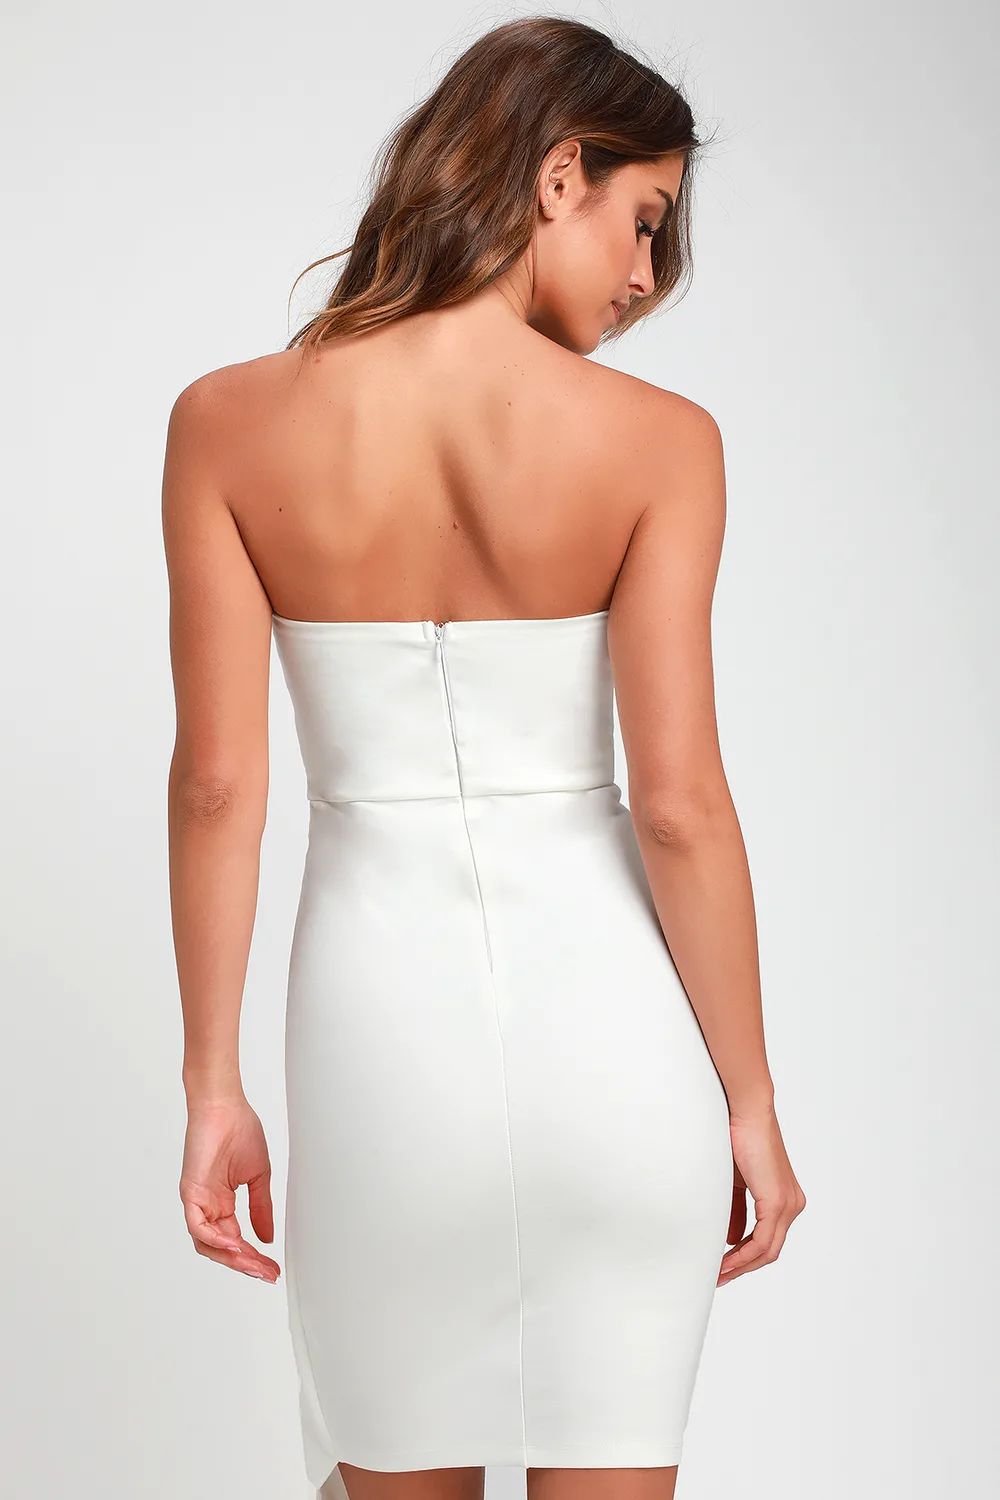 Queen of the City White Strapless Bodycon Dress | Lulus (US)